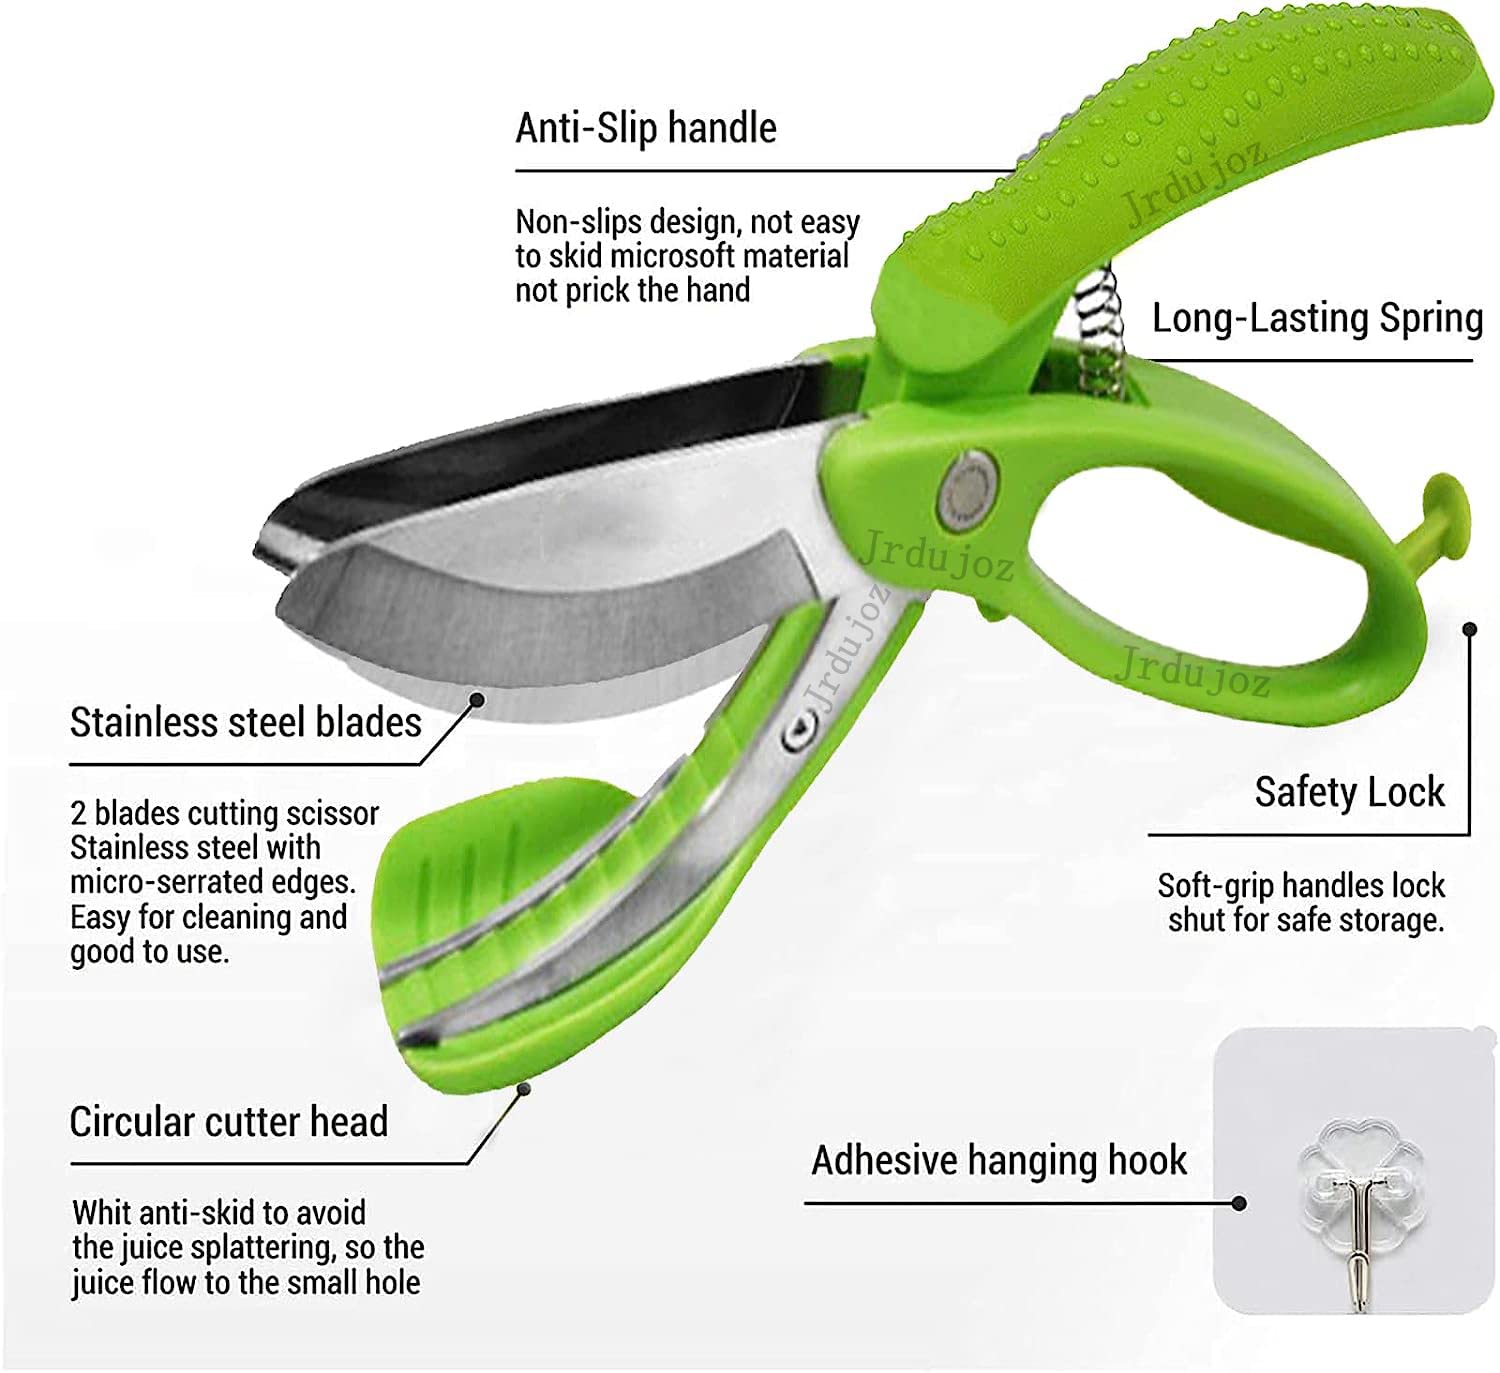 Salad Scissors for Chopped Salad, Lettuce Tong Scissors for Salad Bowl and Cutter, Multifunction Double Blade Salad Chopper Tool (Green)